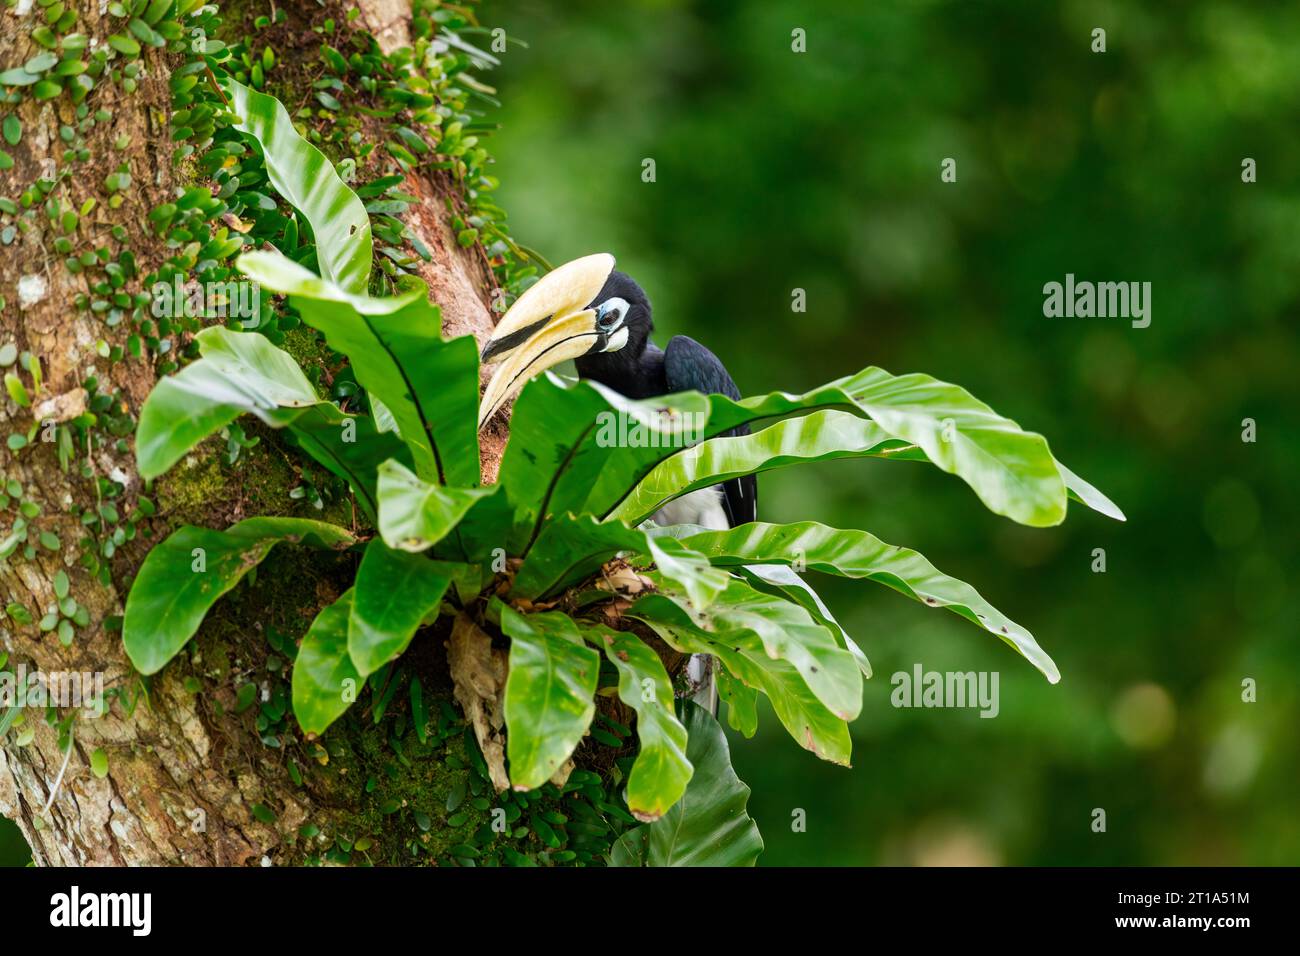 A male oriental pied hornbill foraging in a tree fern, Singapore Stock Photo